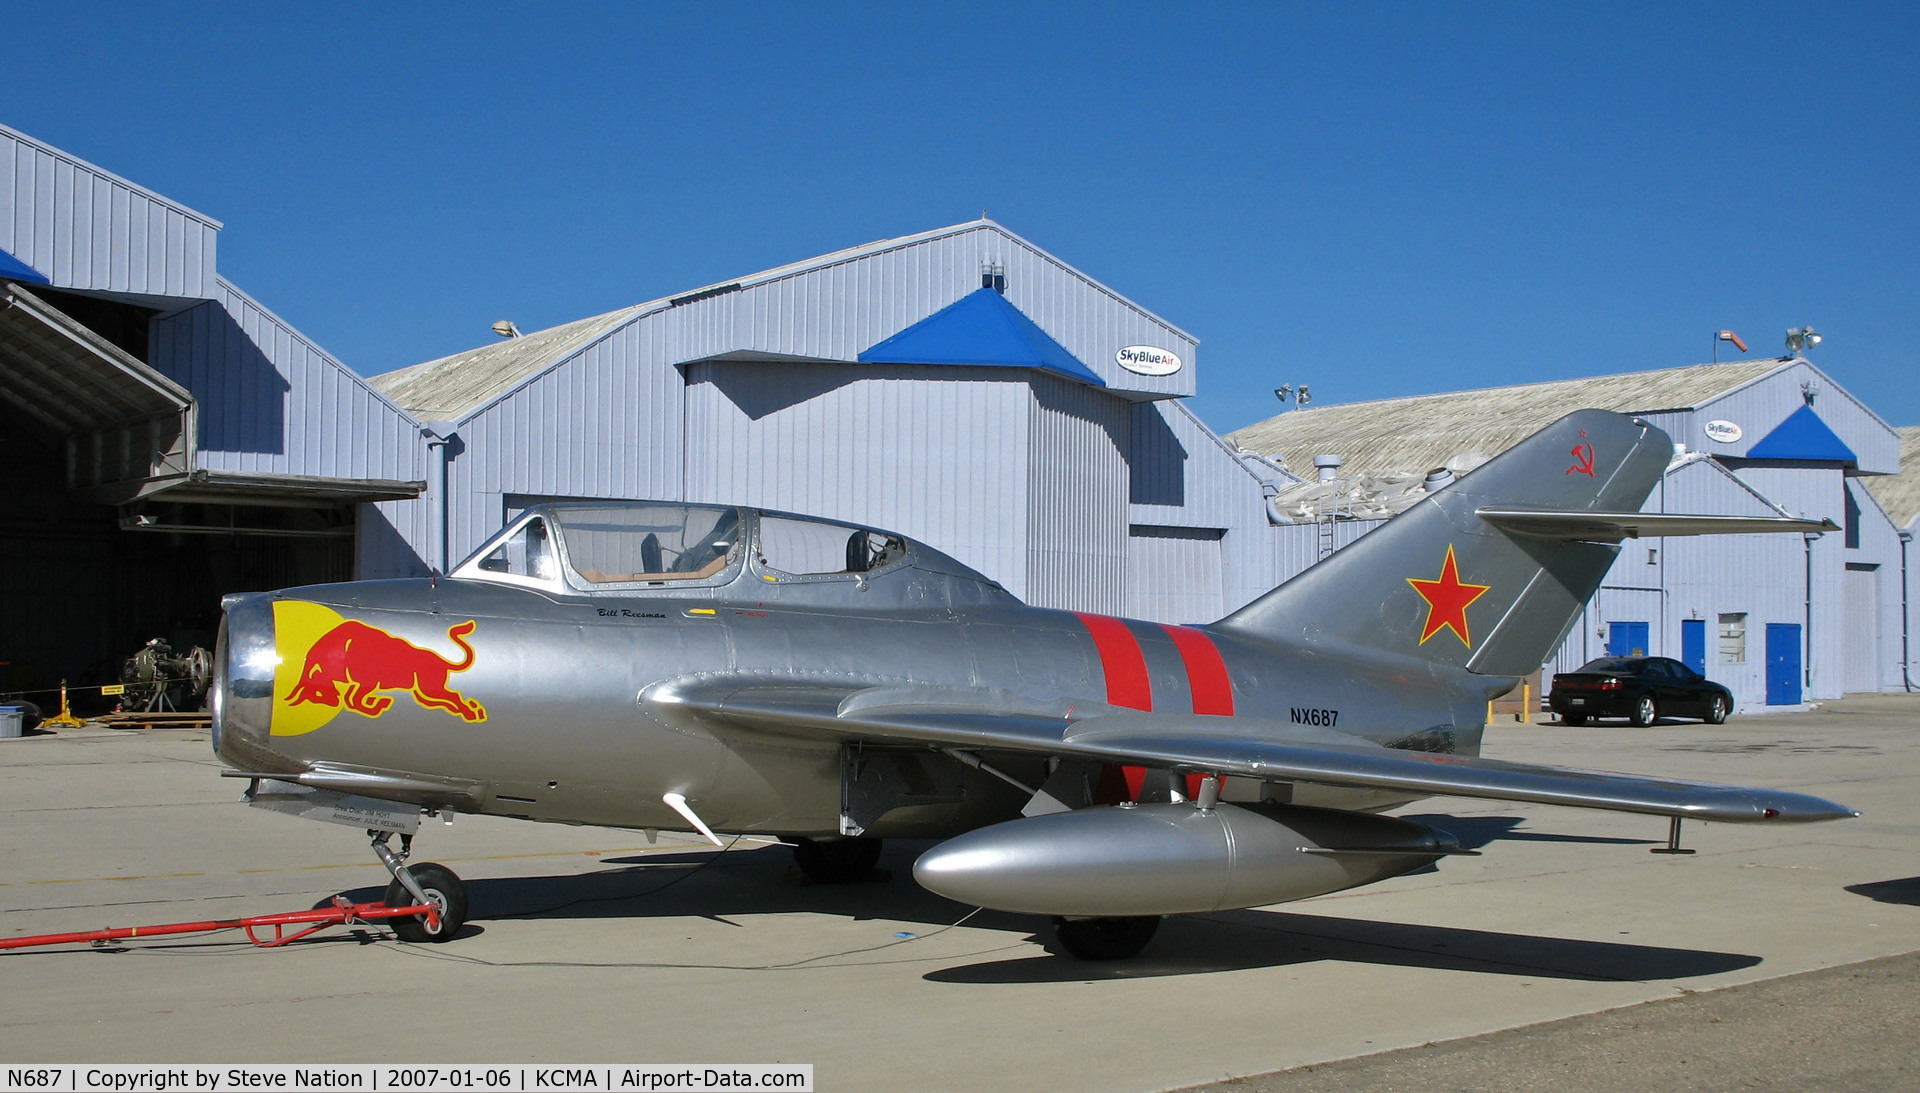 N687, 1953 Mikoyan-Gurevich MiG-15UTI C/N 1A02005, RED BULL MIG-15UTI in Soviet cs  (painted as NX687) at Camarillo Airport (CA) home base on sunny, balmy January day